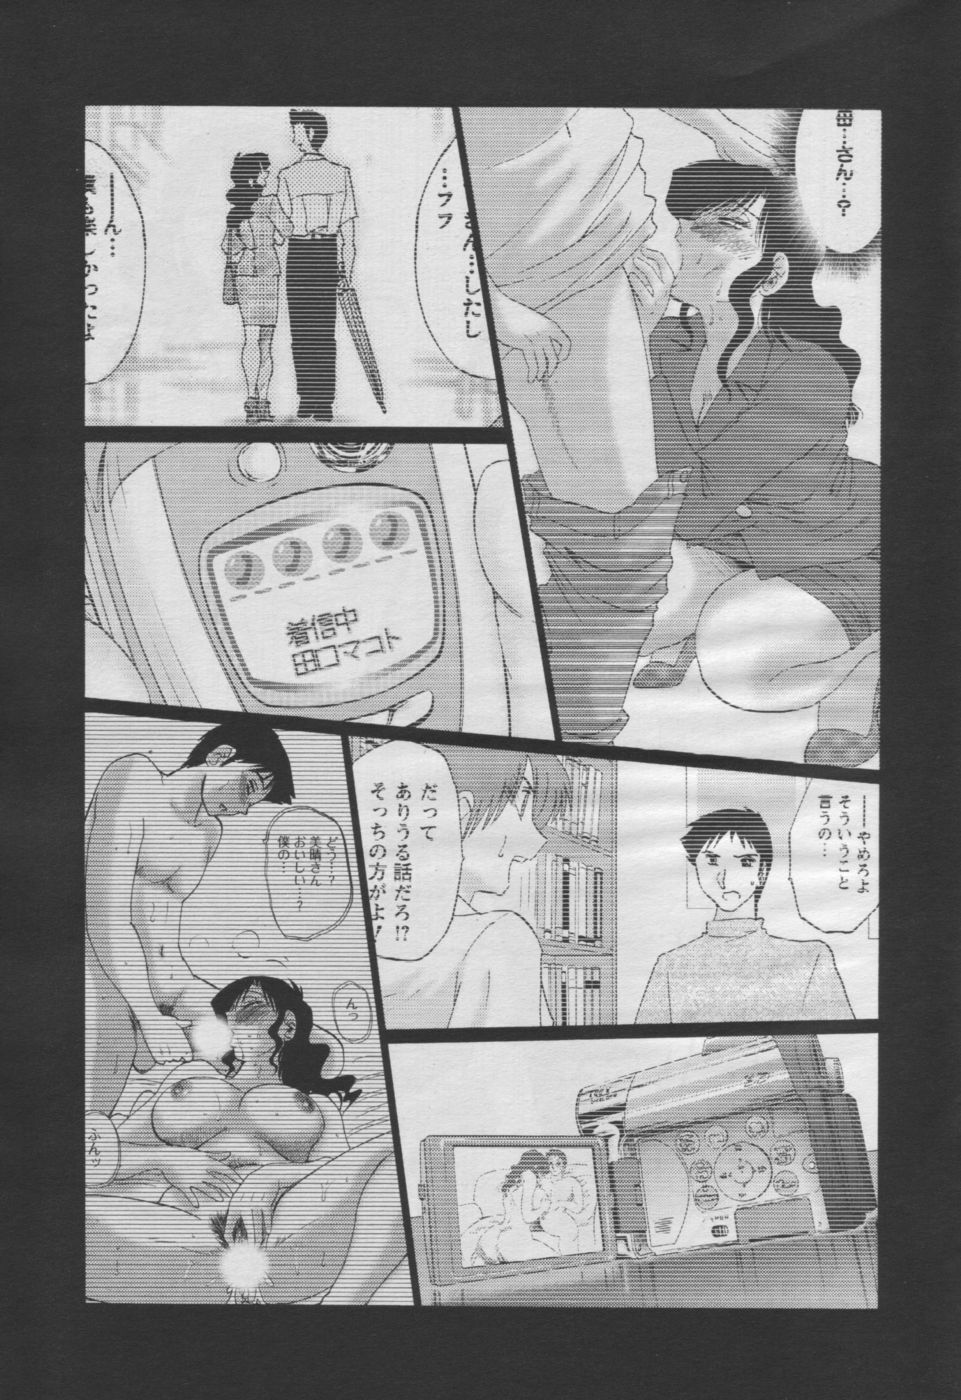 [Anthology] Men's YOUNG 2006-10 page 29 full